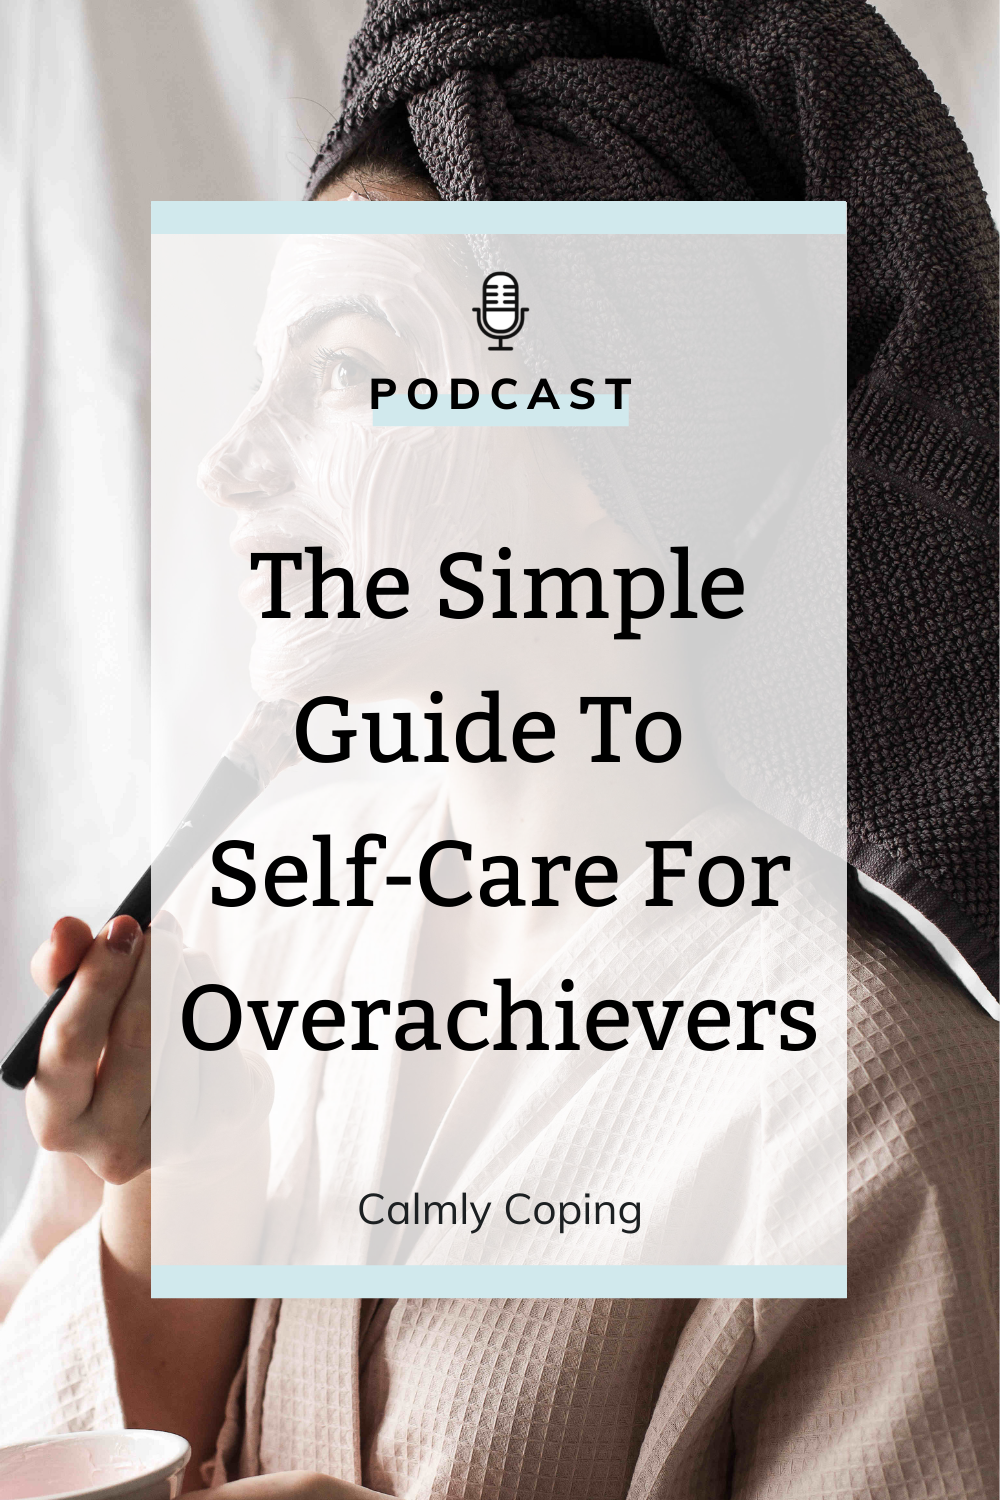 The Simple Guide To Self-Care For Overachievers